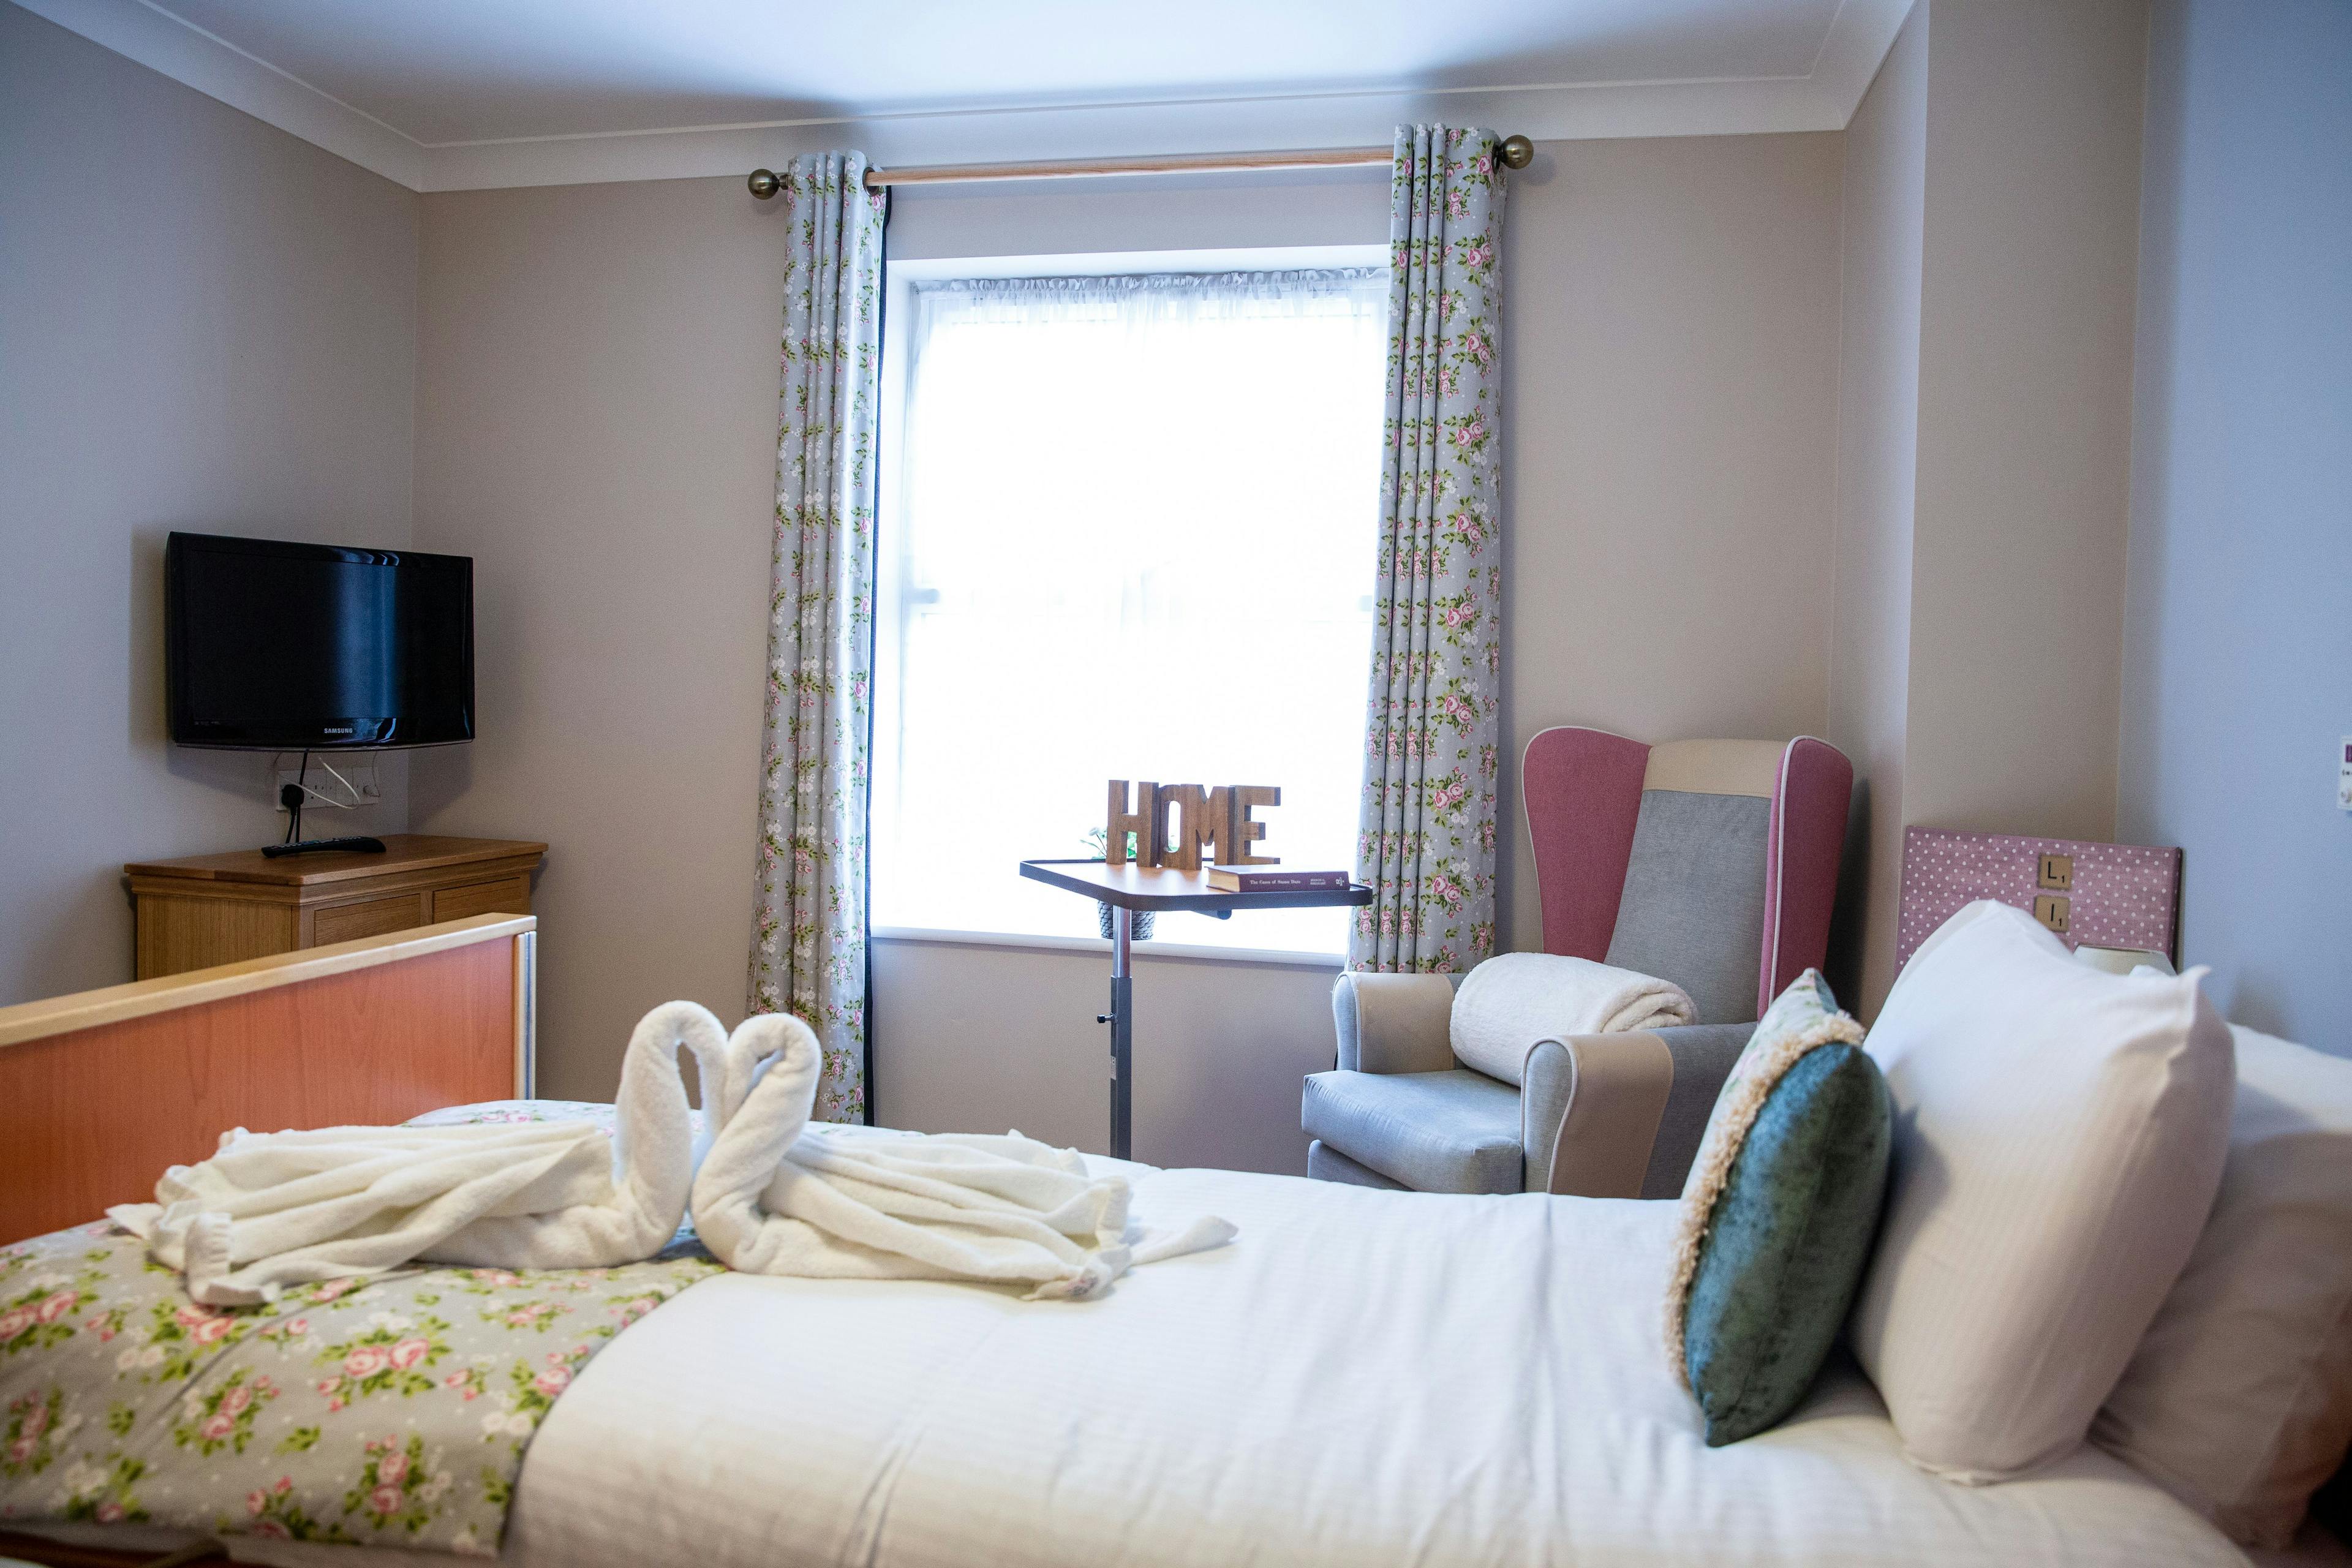 Bedroom of Candlewood House care home in Harrow, Greater London